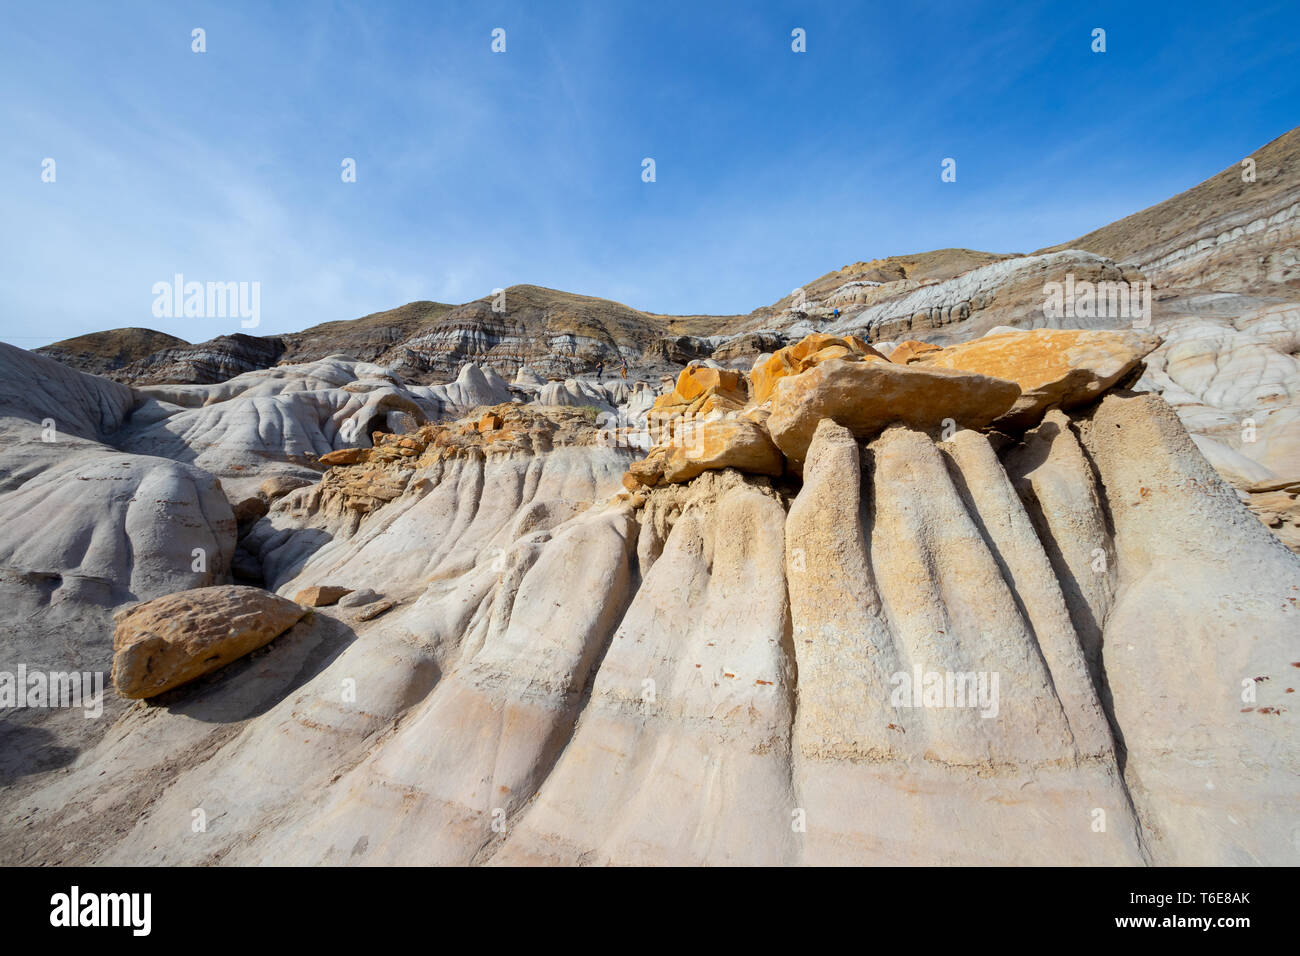 Drumheller HooDoos is a 0.5 kilometer heavily trafficked loop trail located near Drumheller, Alberta, Canada that features a cave, travel Alberta,Tour Stock Photo